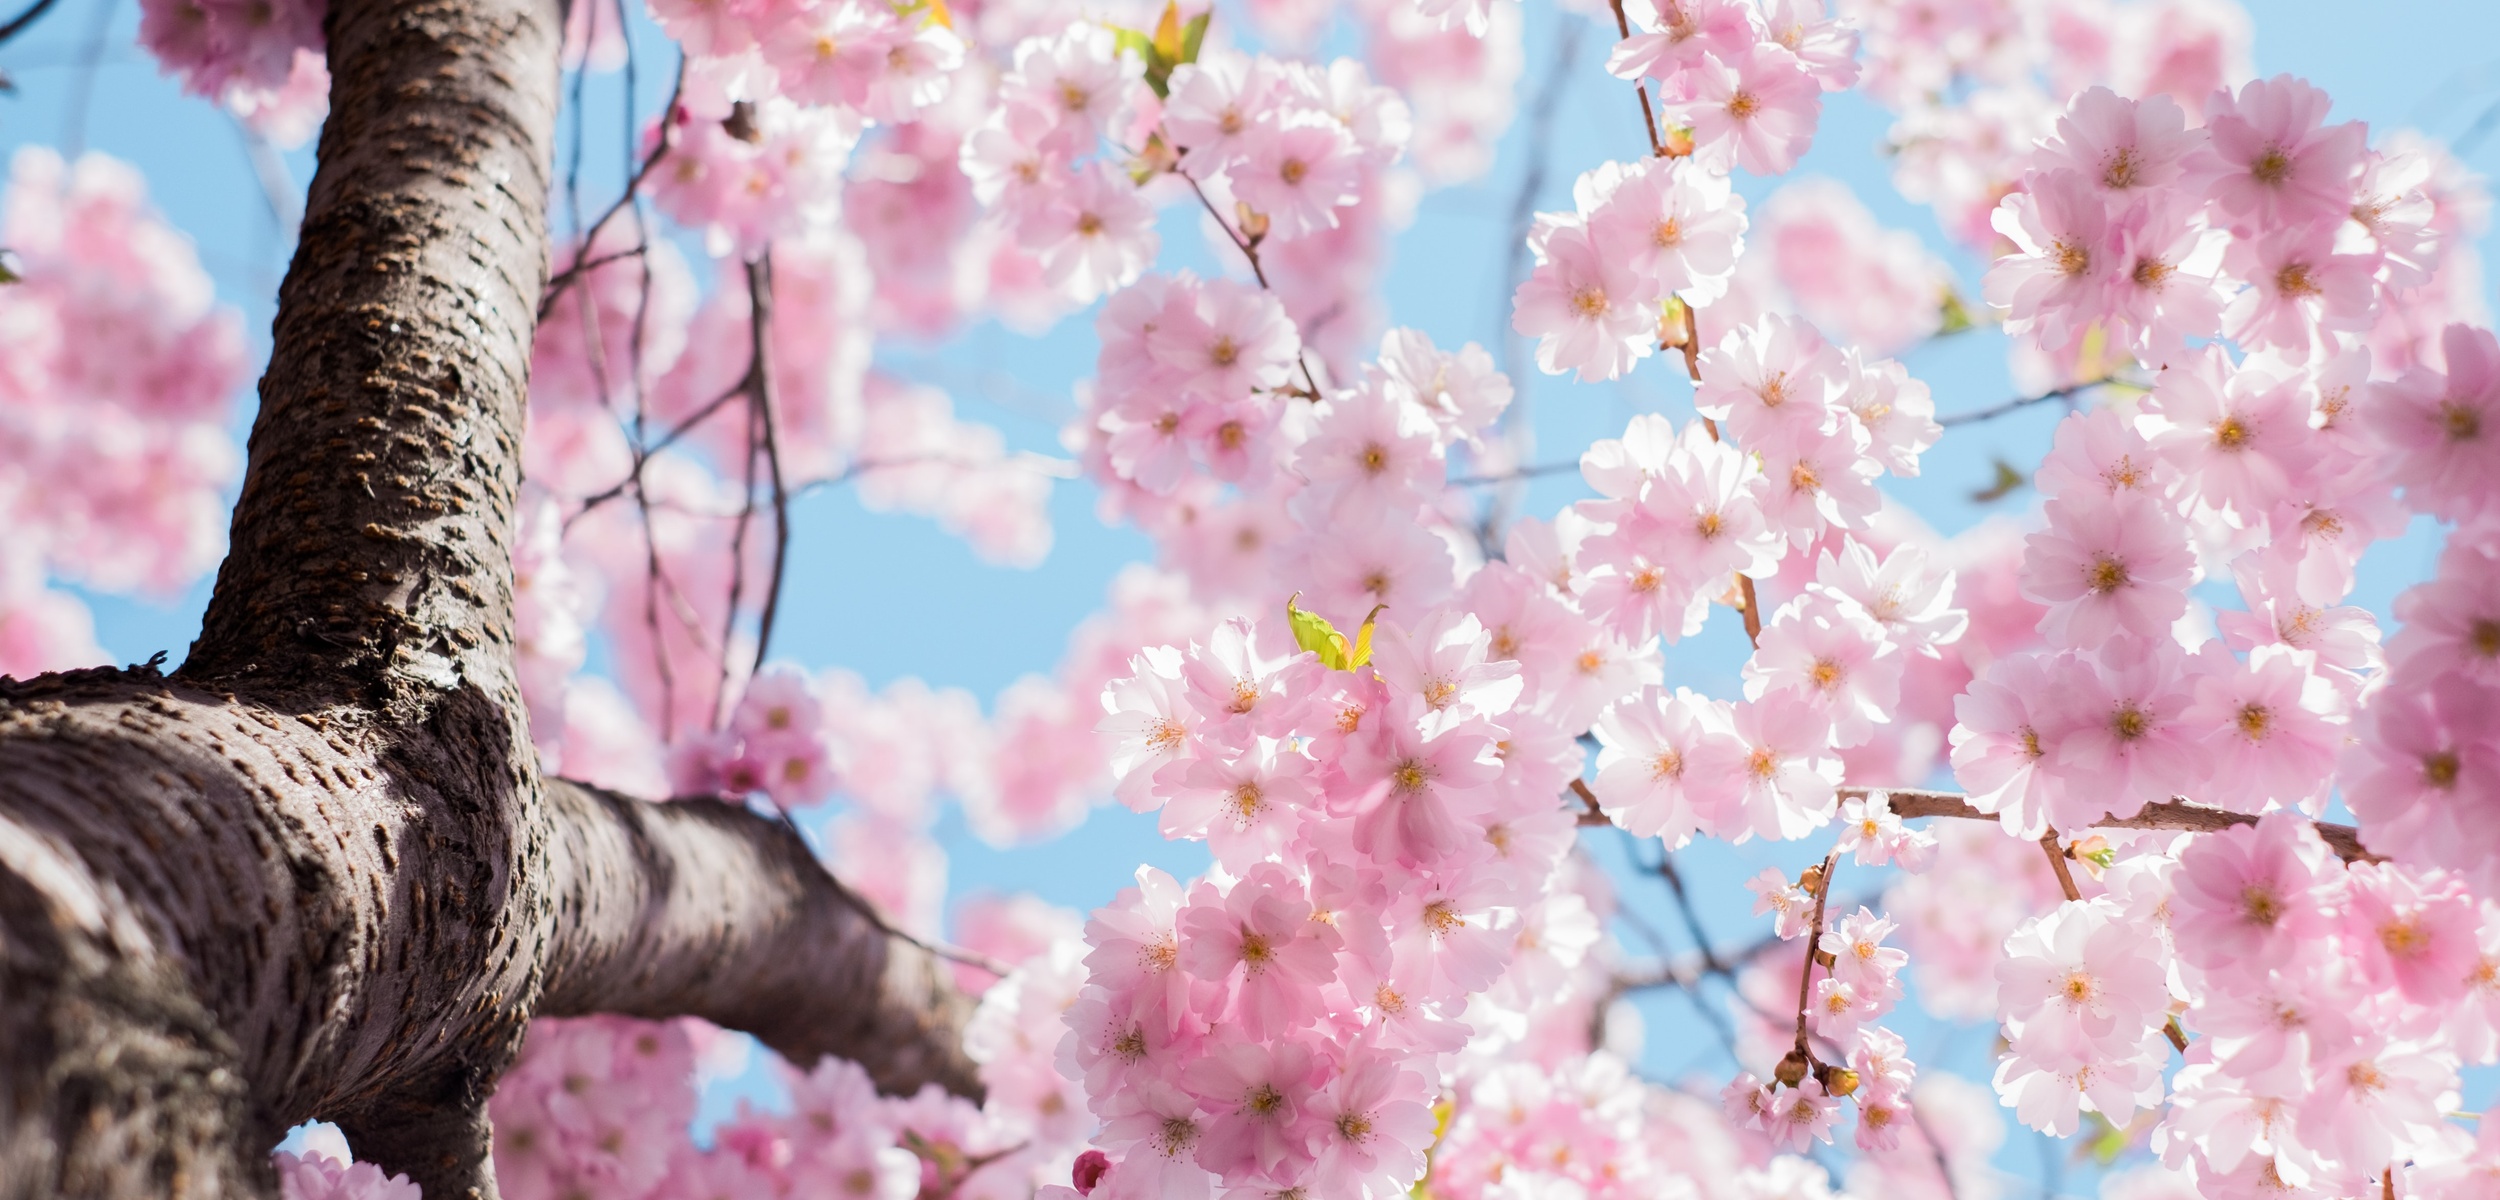 A cherry blossoms tree viewed from below.